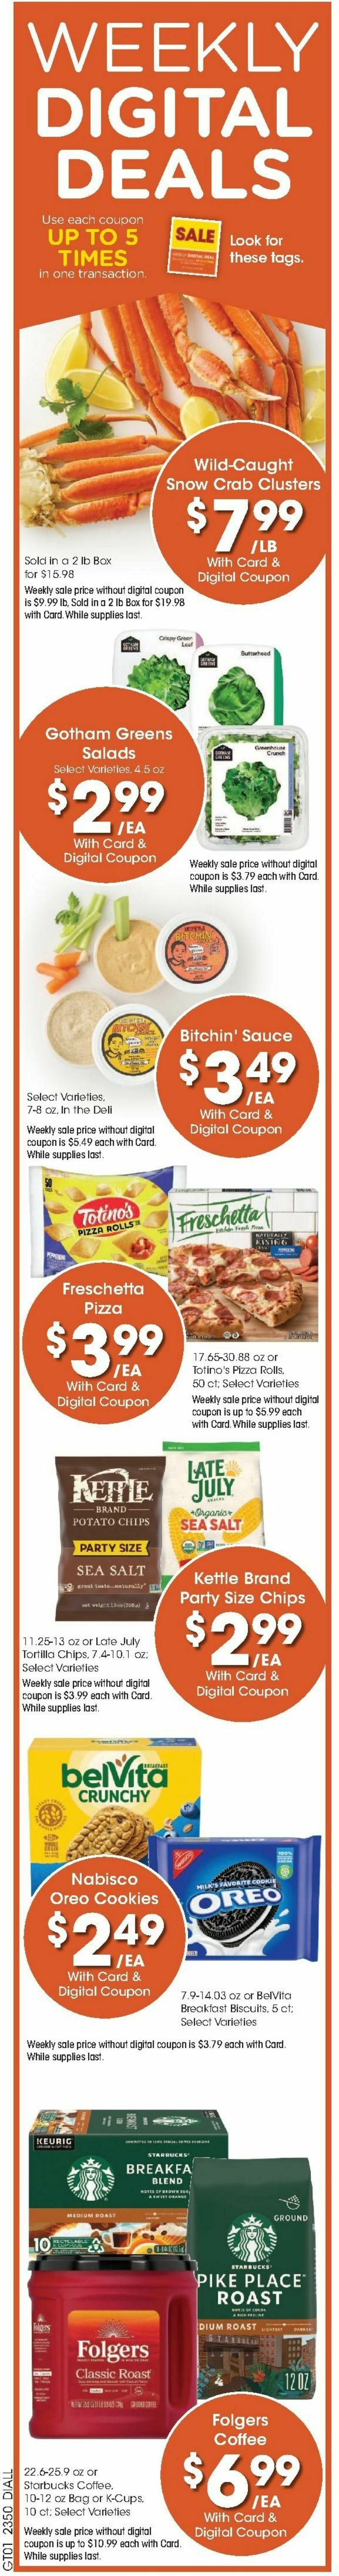 Baker's Weekly Ad from January 10